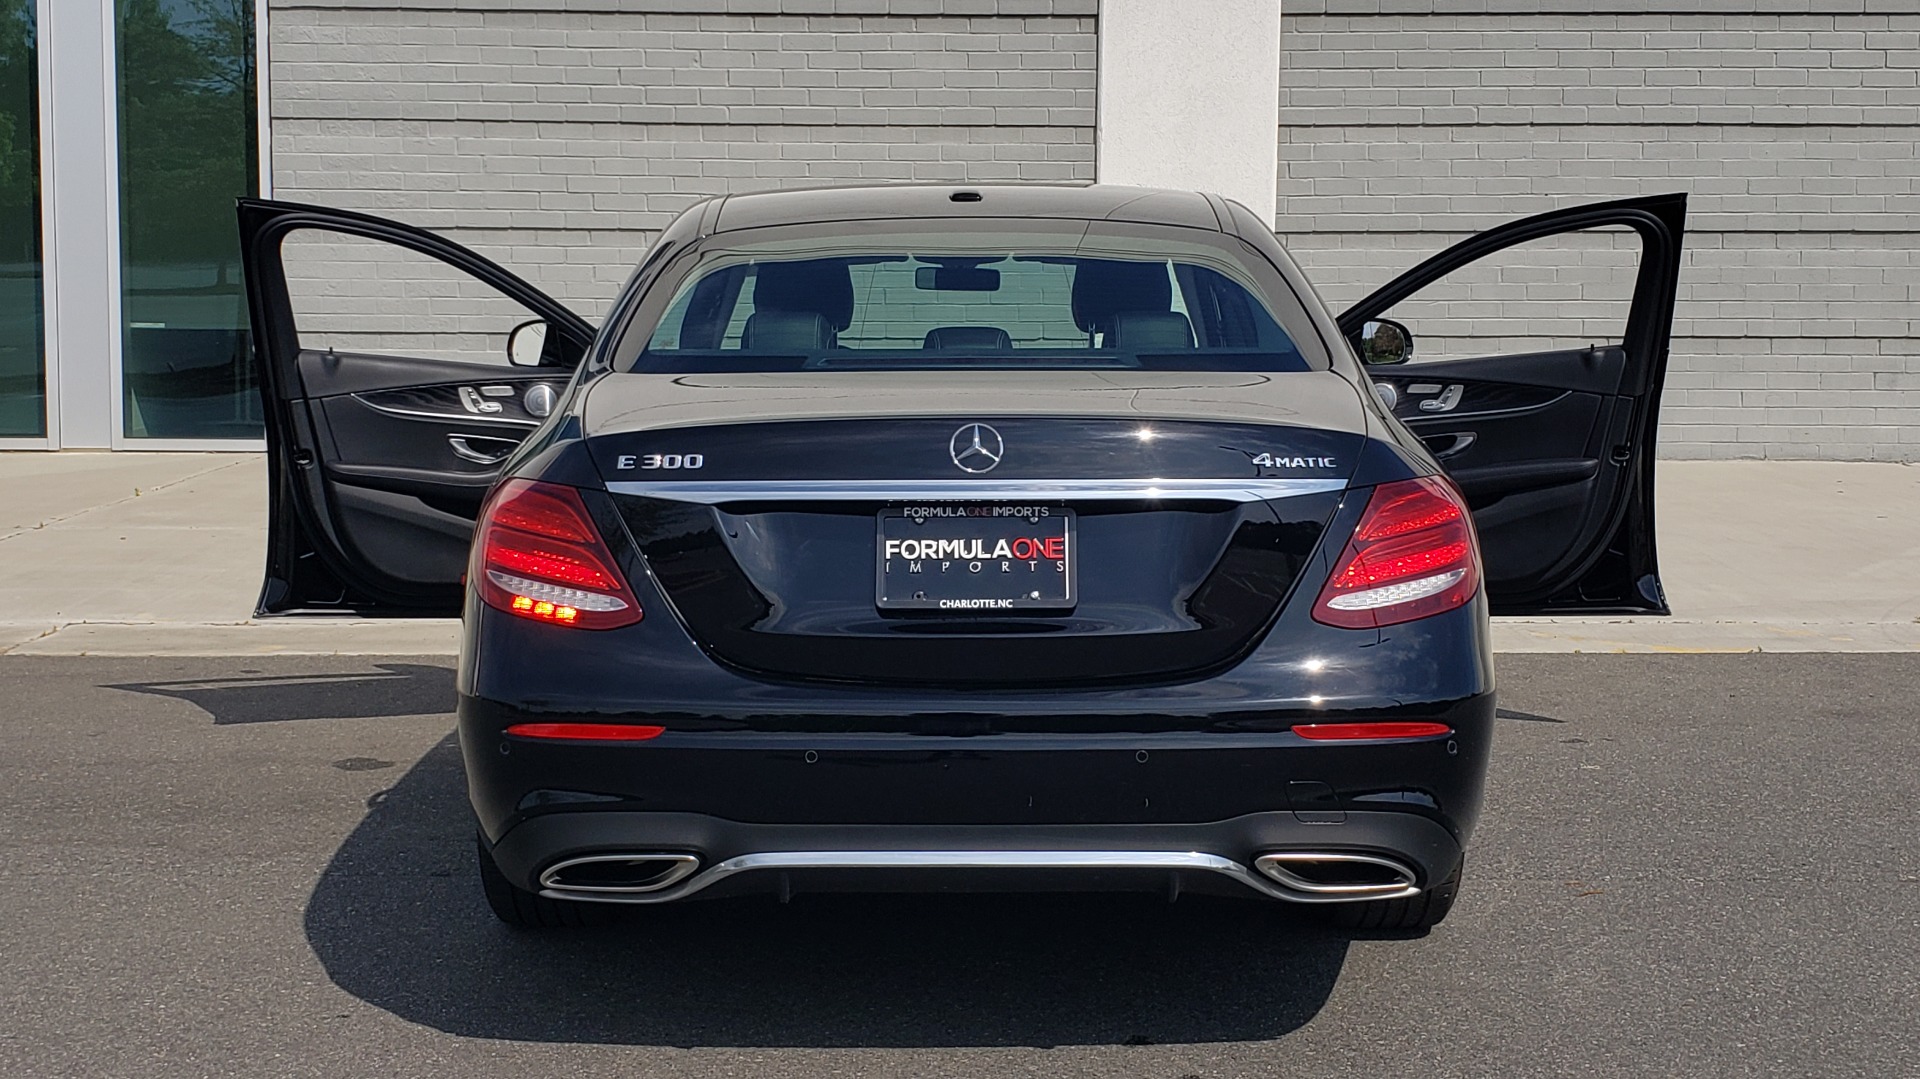 Used 2018 Mercedes-Benz E-CLASS E 300 PREMIUM / 4MATIC / NAV / SUNROOF / H/K SND / REARVIEW for sale Sold at Formula Imports in Charlotte NC 28227 26